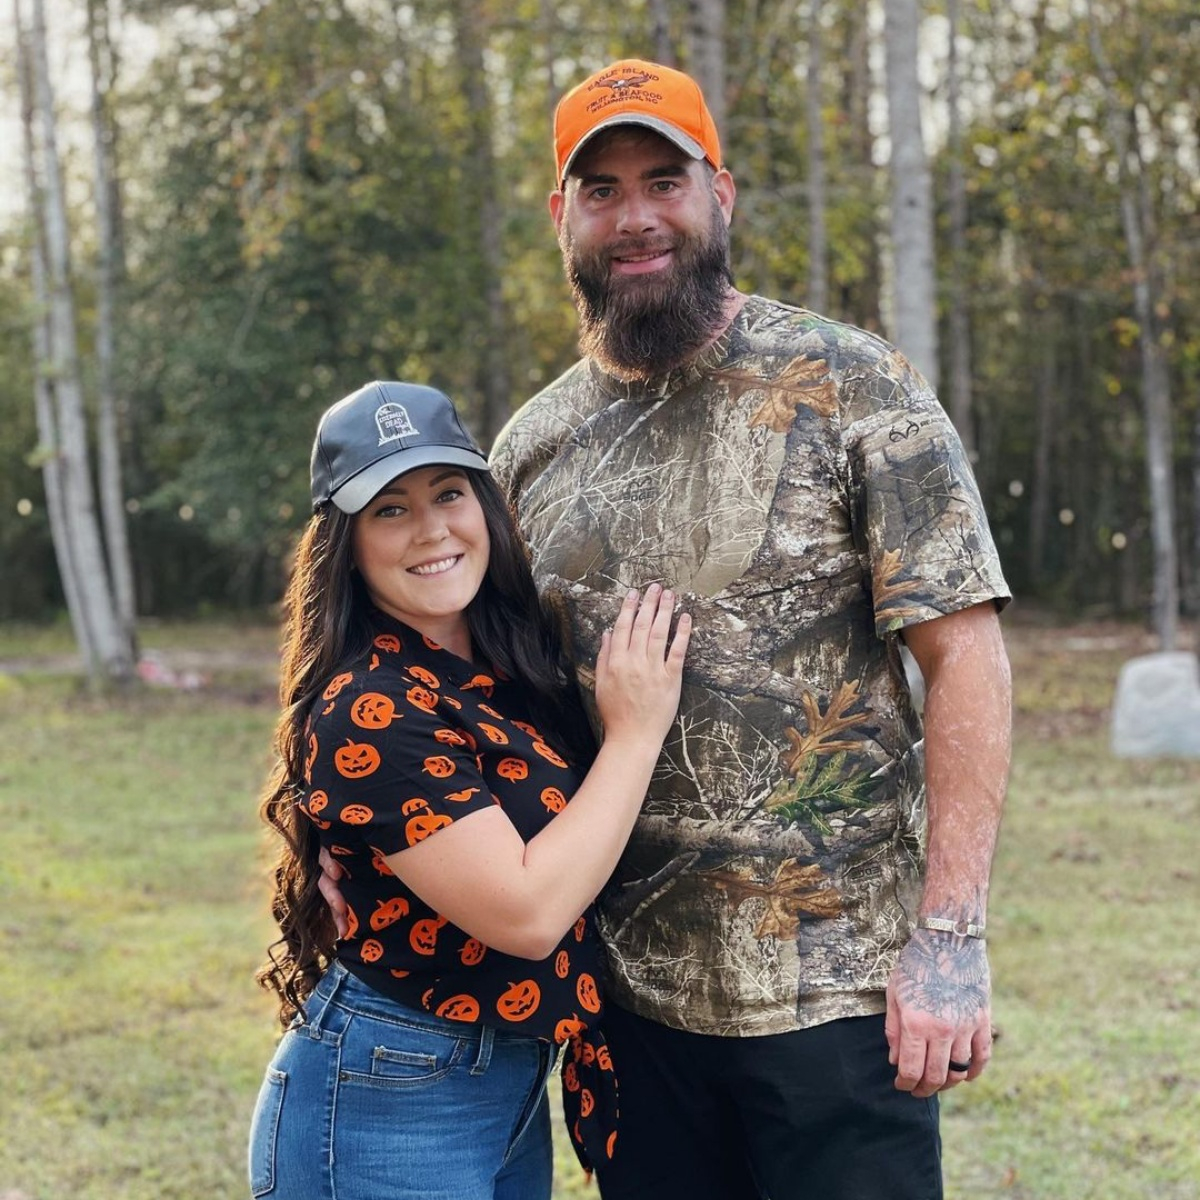 Jenelle Evans Reacts to Claim She Lost Everything Over David Eason